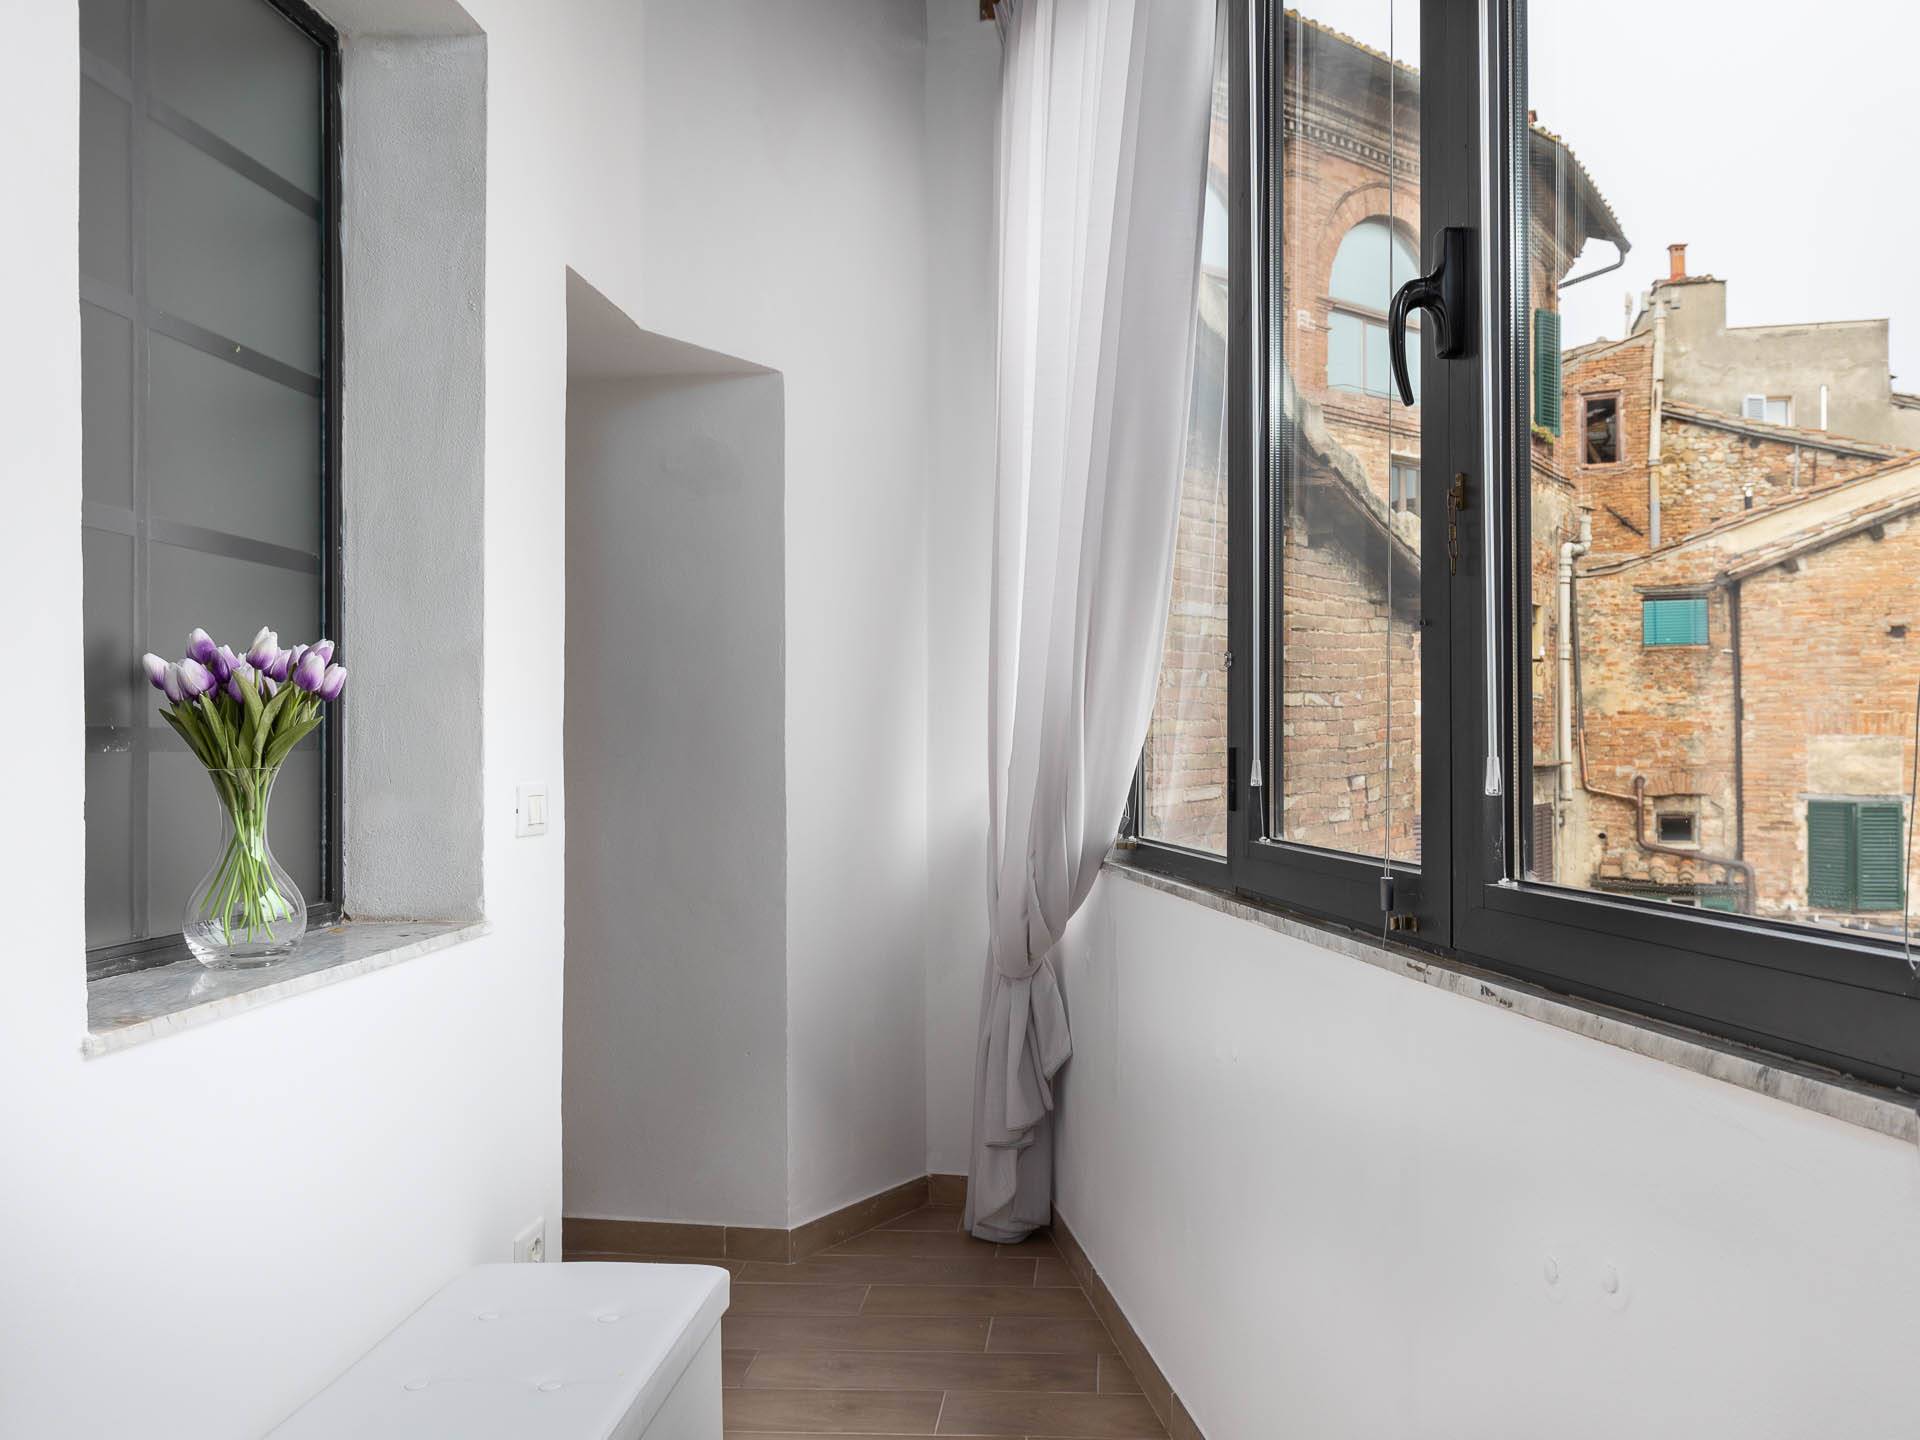 CENTRO - CONTRADA TARTUCA, SIENA, Apartment for the vacation for rent of 78 Sq. mt., Restored, Heating Individual heating system, Energetic class: E, 